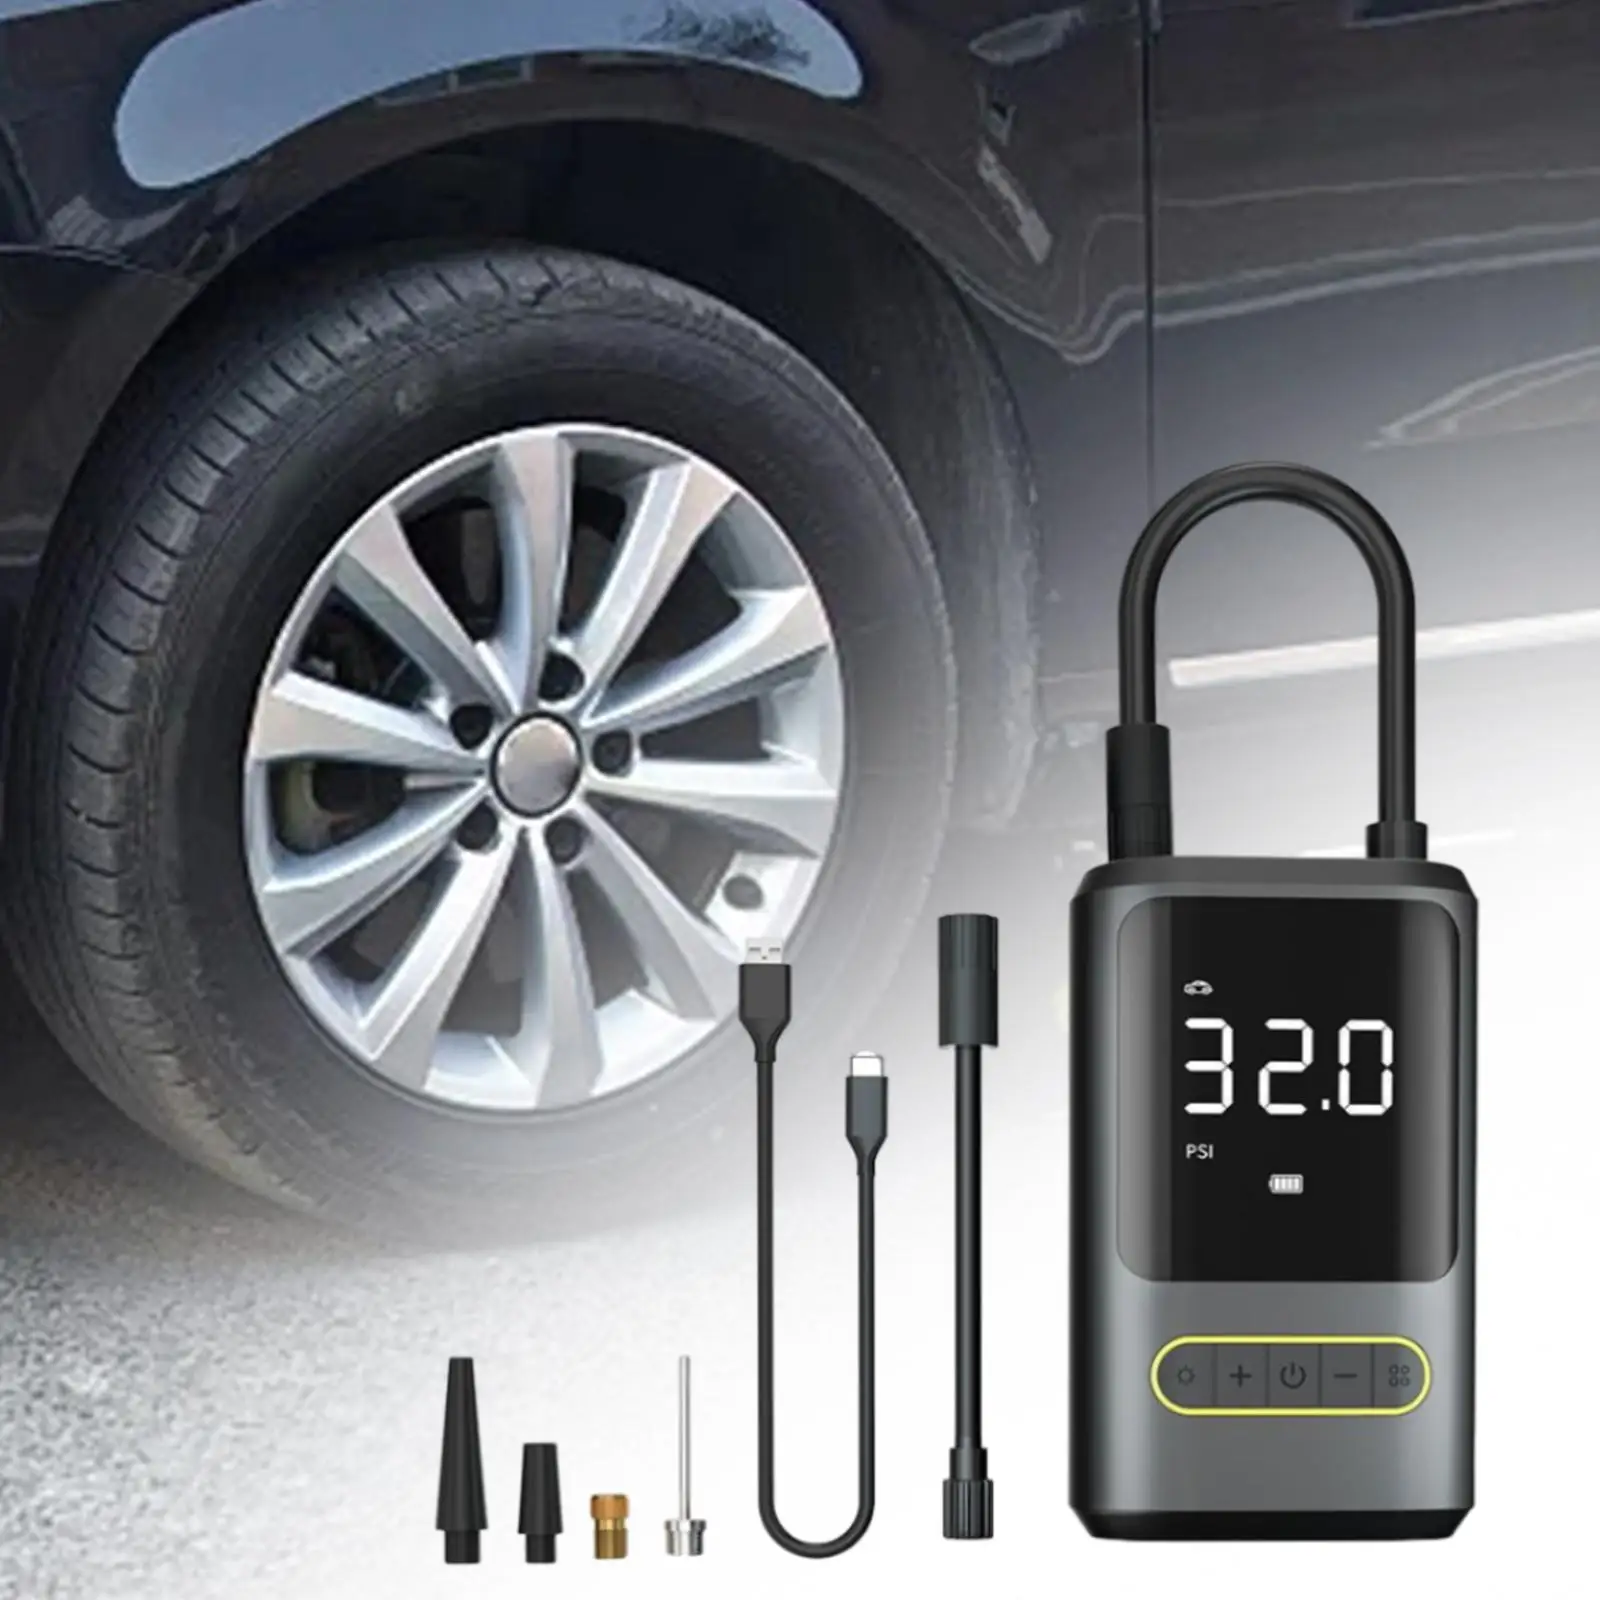 Automobile Tire Inflator Professional Mini Durable Illumination Tire Air Pump for Bicycle Balls Cars Truck Motorcycles